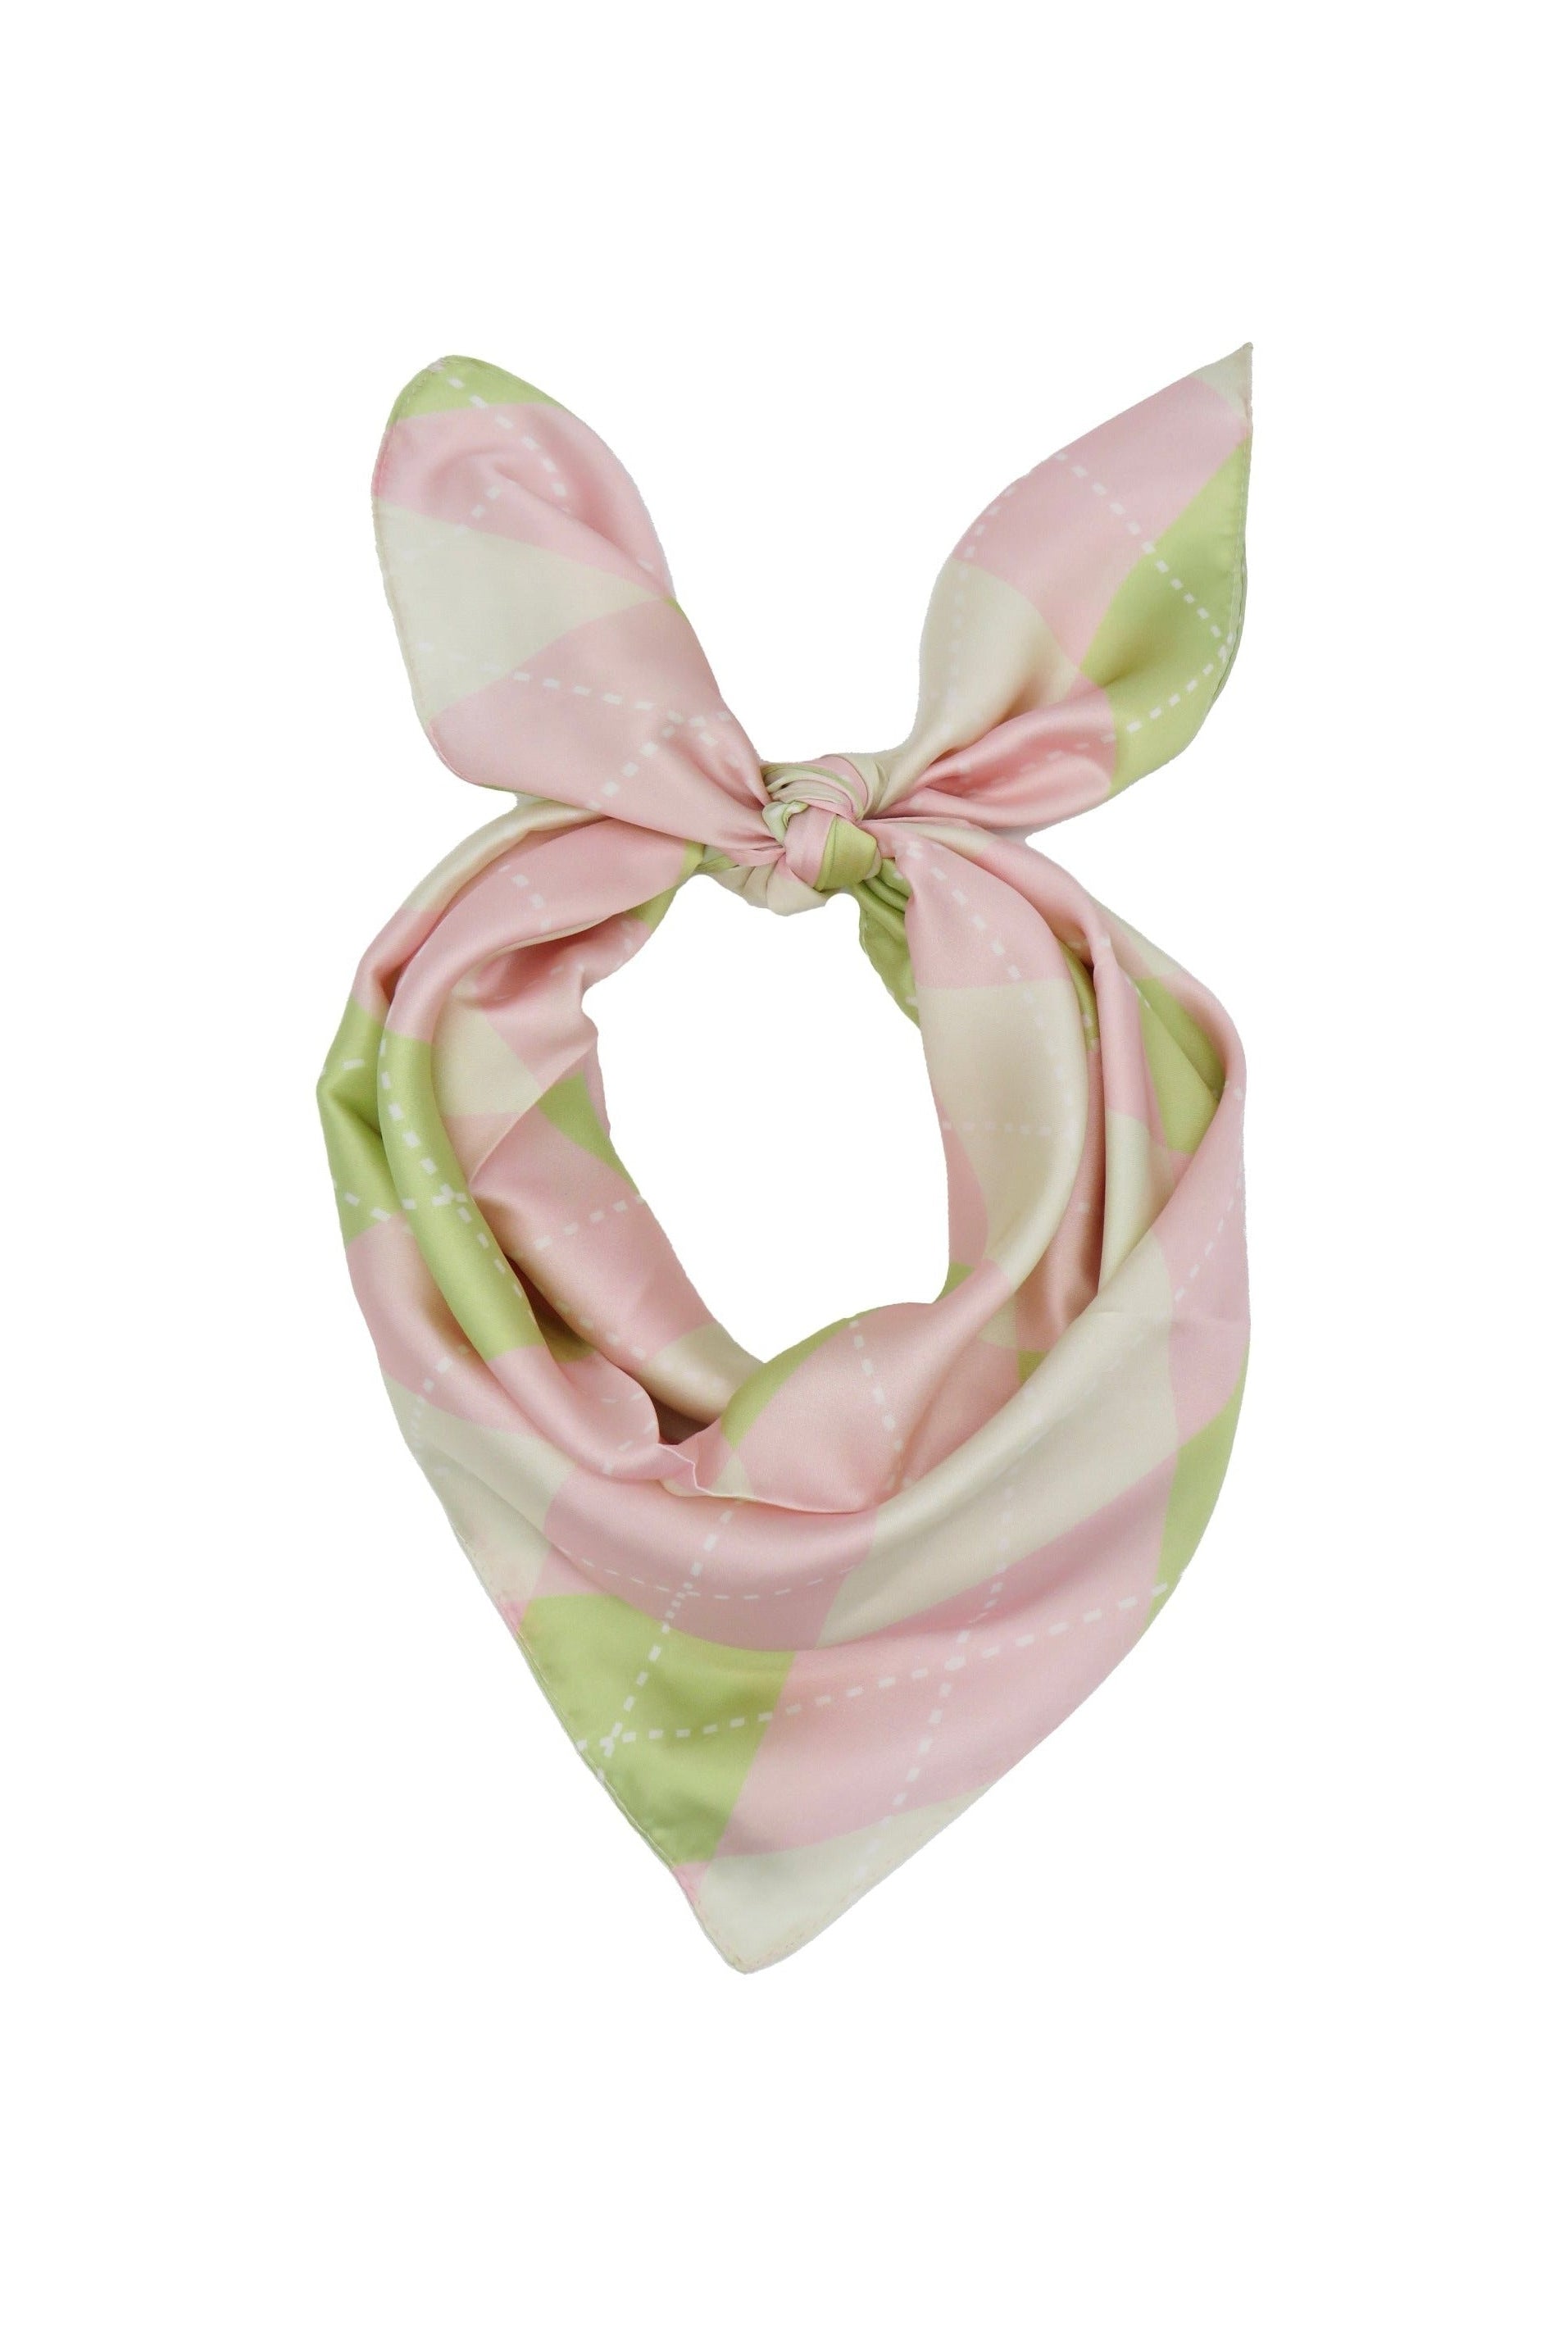 Multiway Headscarf in Pink and Green Argyle Print | Bandana | Satin | Top | Neck Tie | Festival | Summer | Beach | Holiday | Glam | Party | Brunch | Women's Accessories | Accessory 